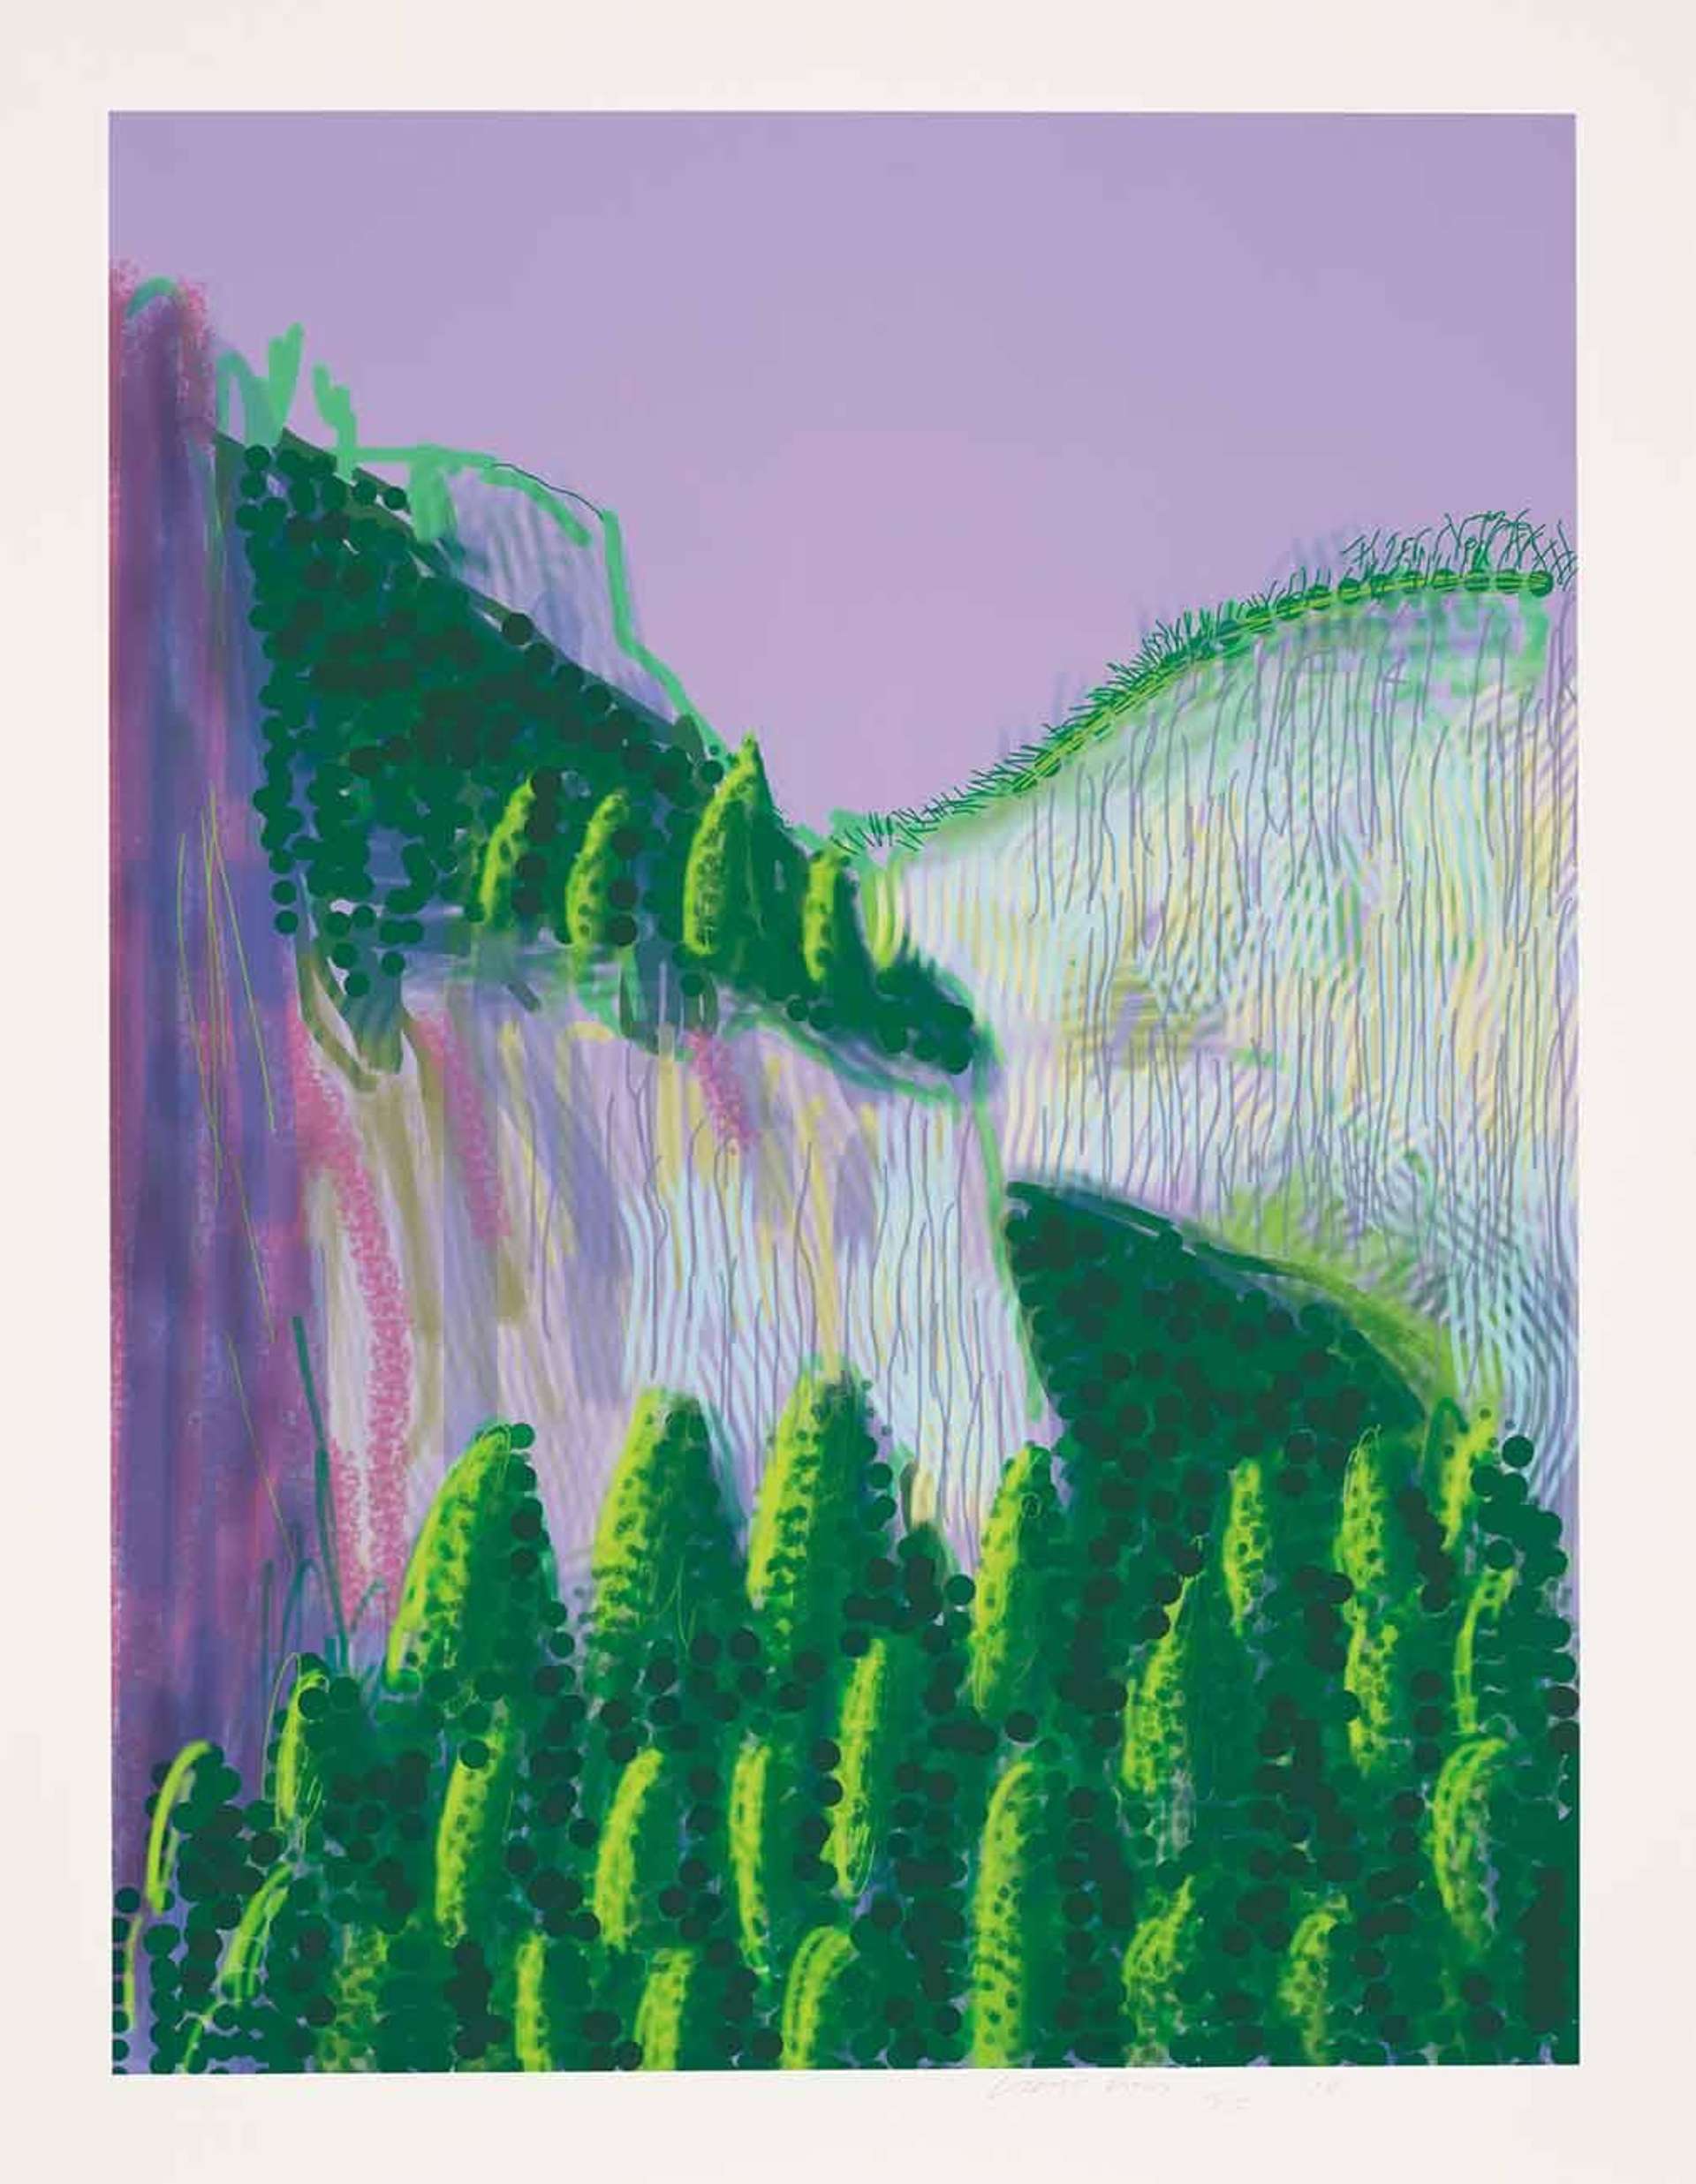 David Hockney’s The Yosemite Suite 11. A digital print of a landscape view of California's Yosemite National Park. A forest of dark green pine trees against a soft purple sky. 